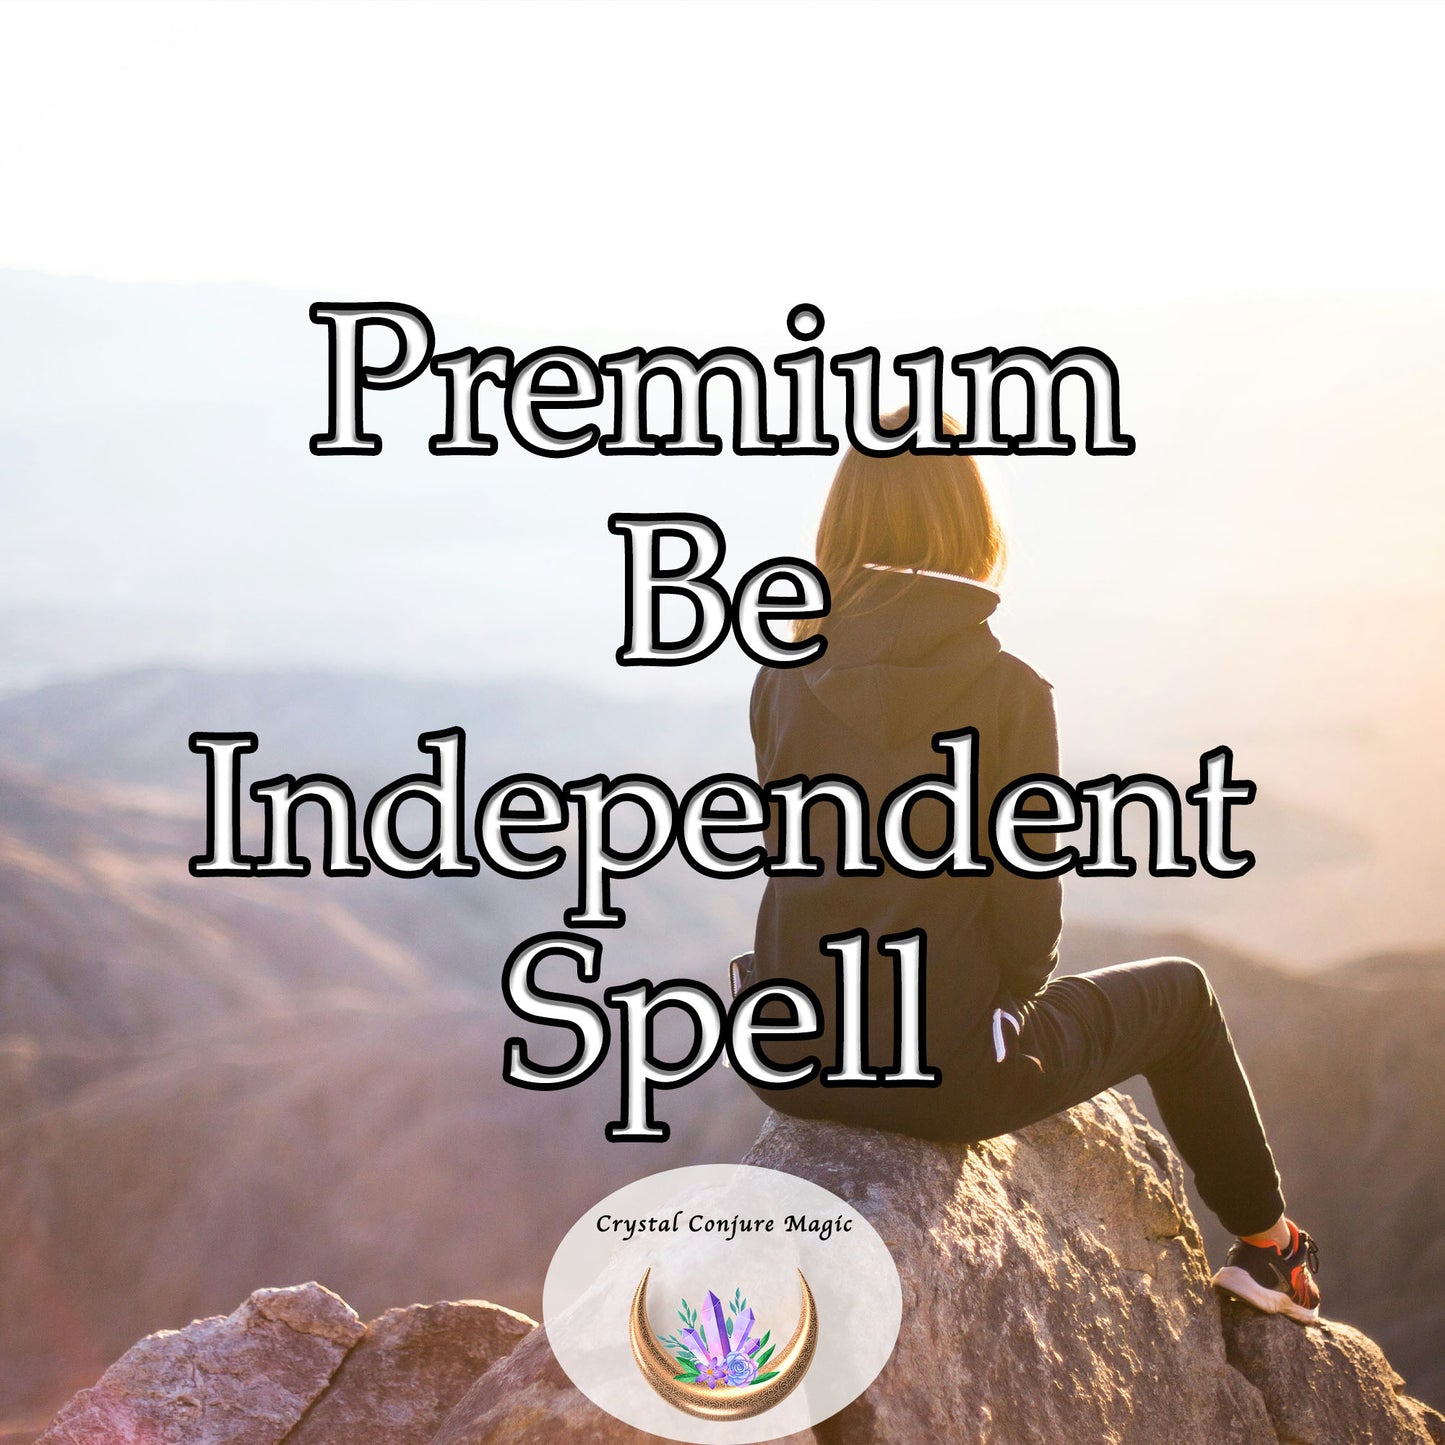 Premium Be Independent Spell - take back control of your life and become more self-reliant